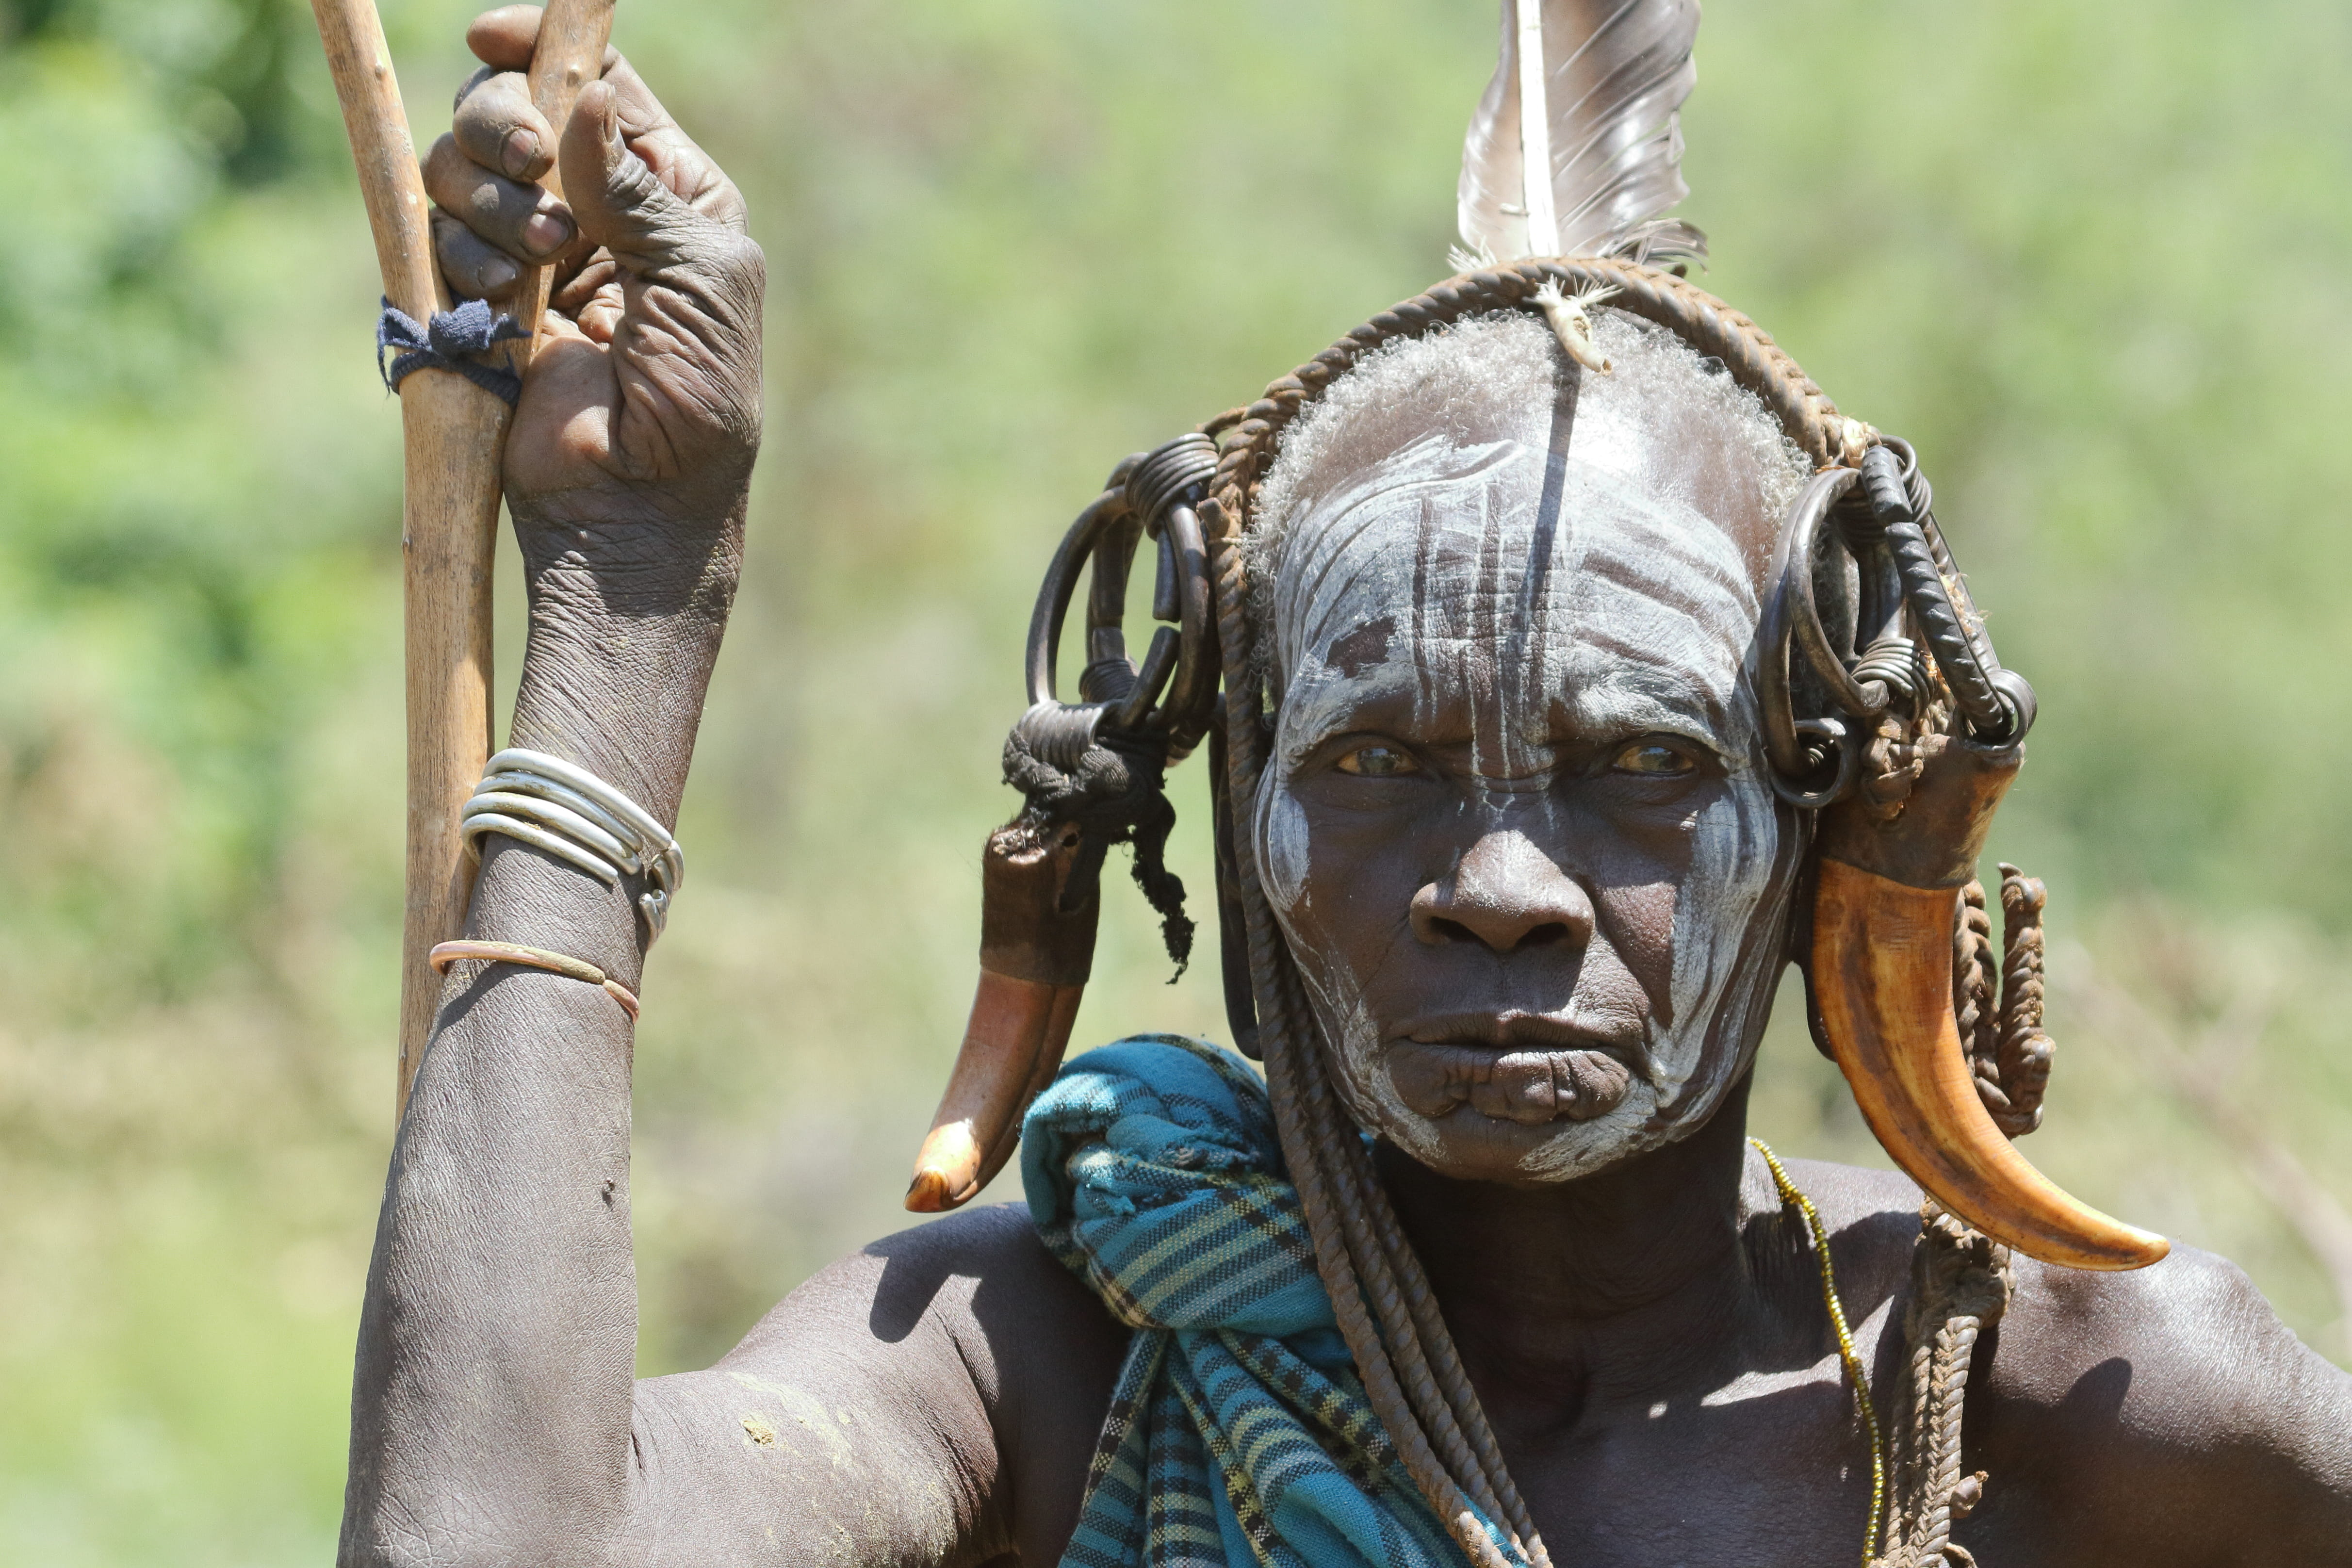 The incredible tribes of the Omo Valley